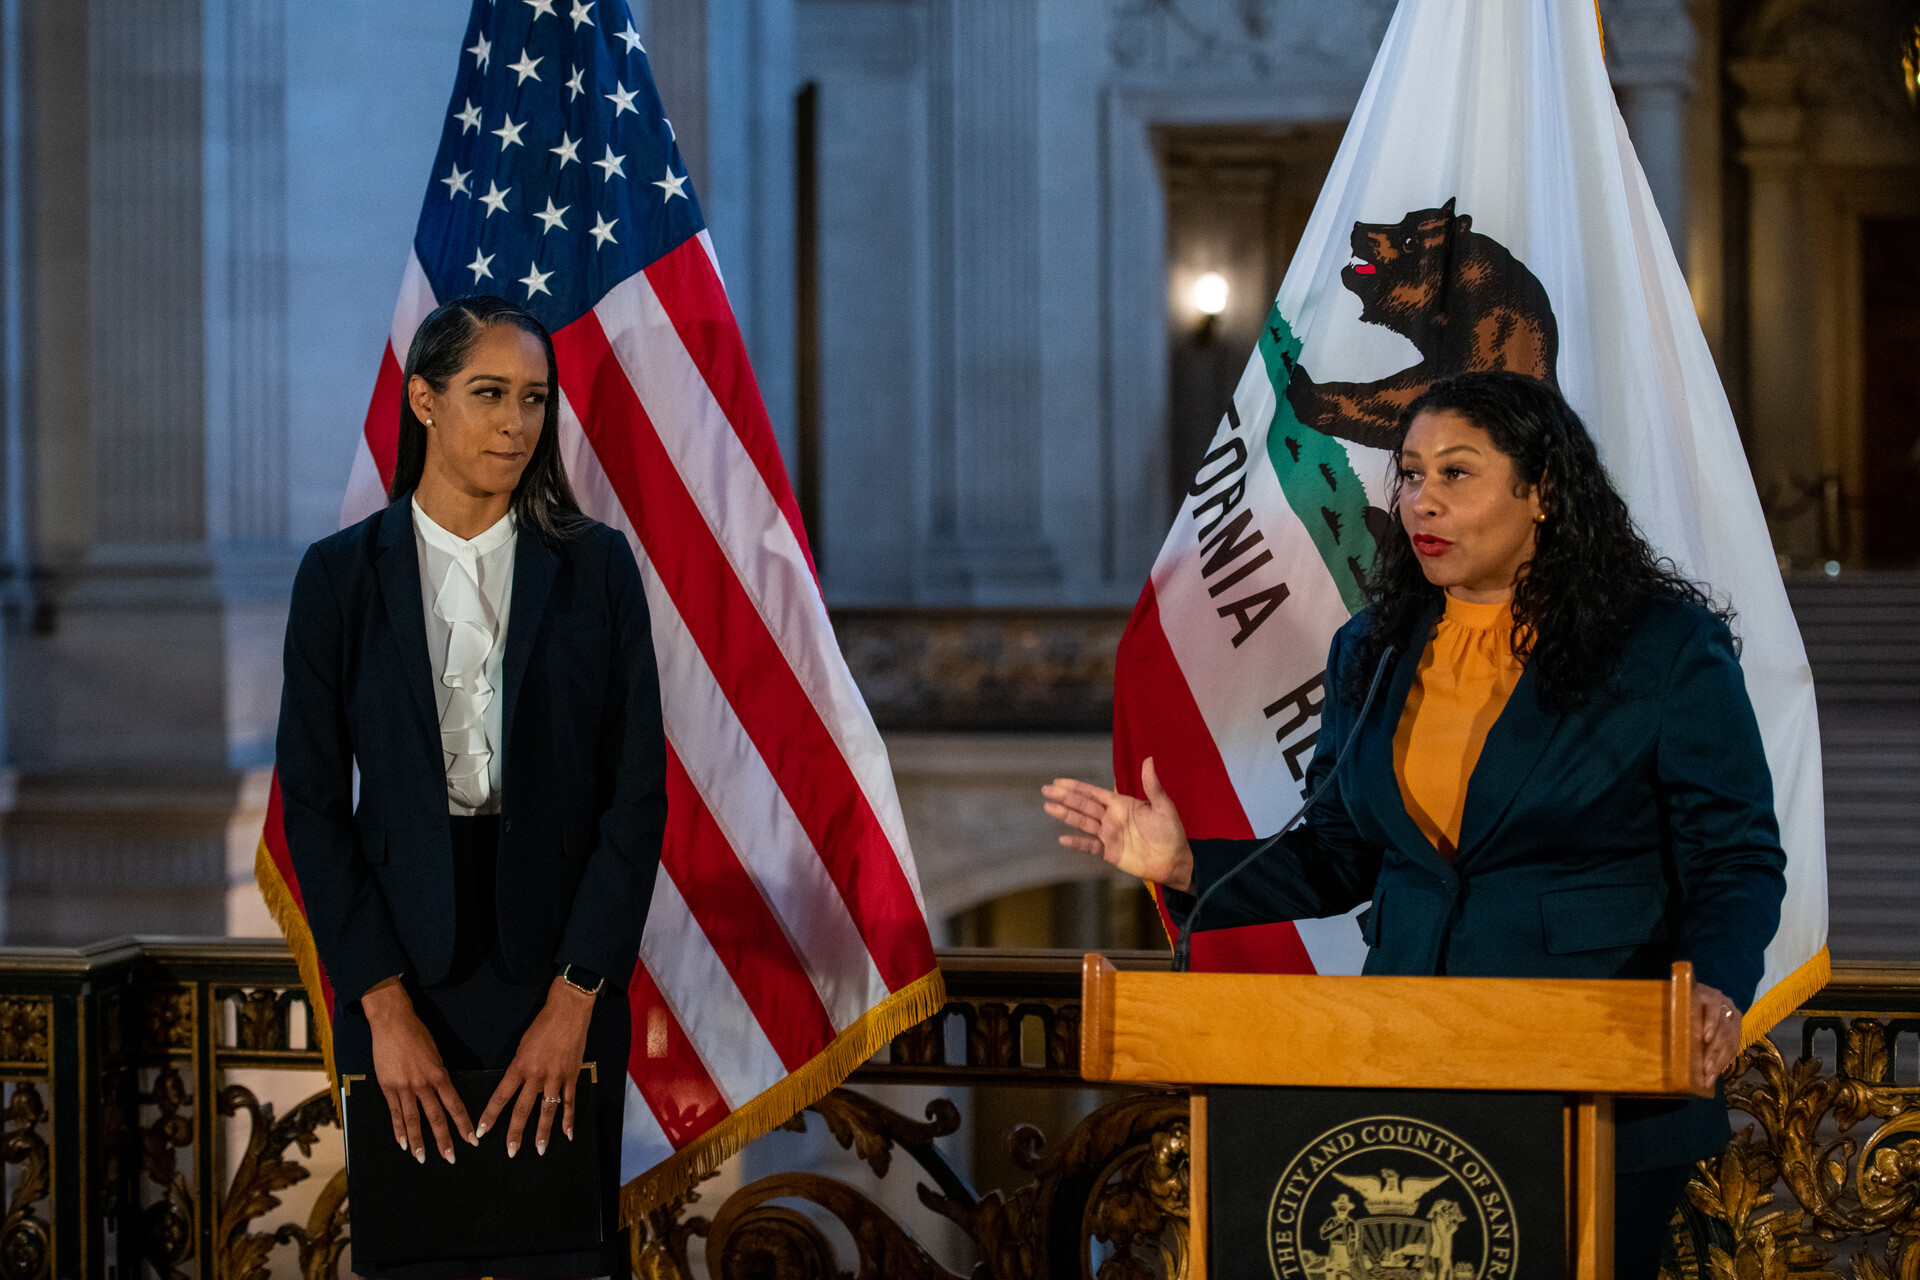 Mayor London Breed stands at a podium, her right hand extended,with a California and American flag behind her, introducing Brooke Jenkins - standing to her right — as San Francisco's new district attorney.